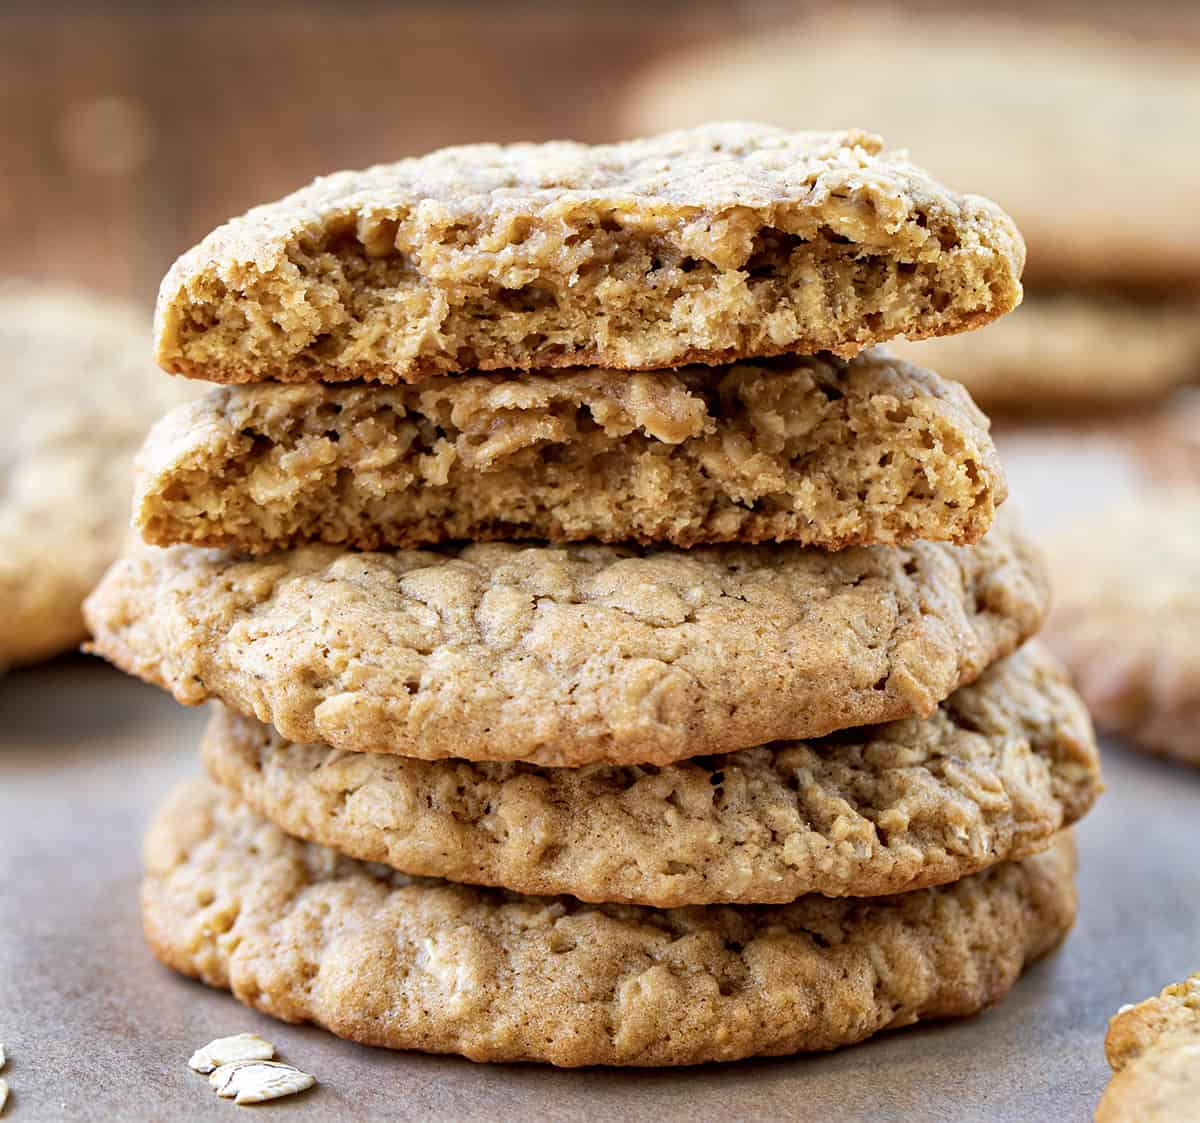 Stacked Oatmeal Cookies on a Wooden Cutting Board Surrounded by Cookies.